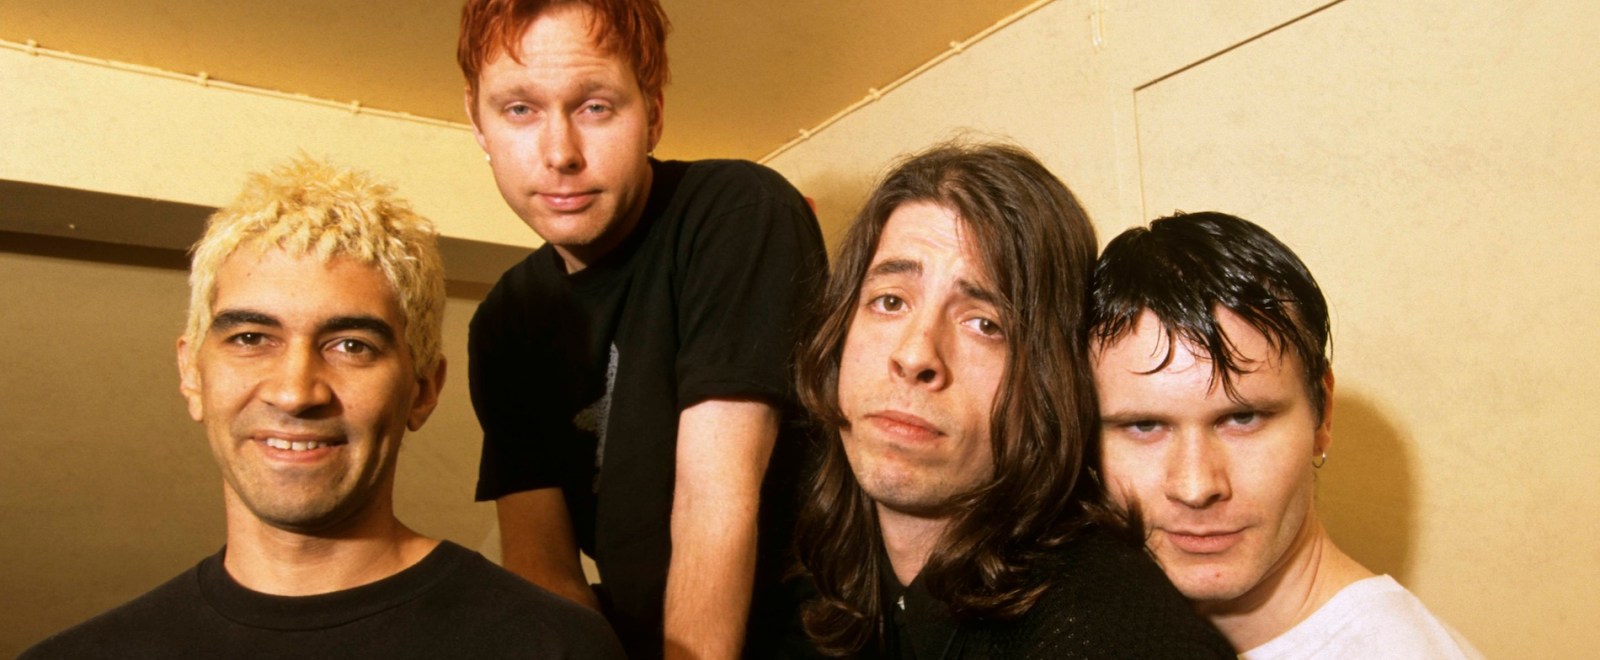 foo-fighters-dave-grohl-1995-getty-full.jpg